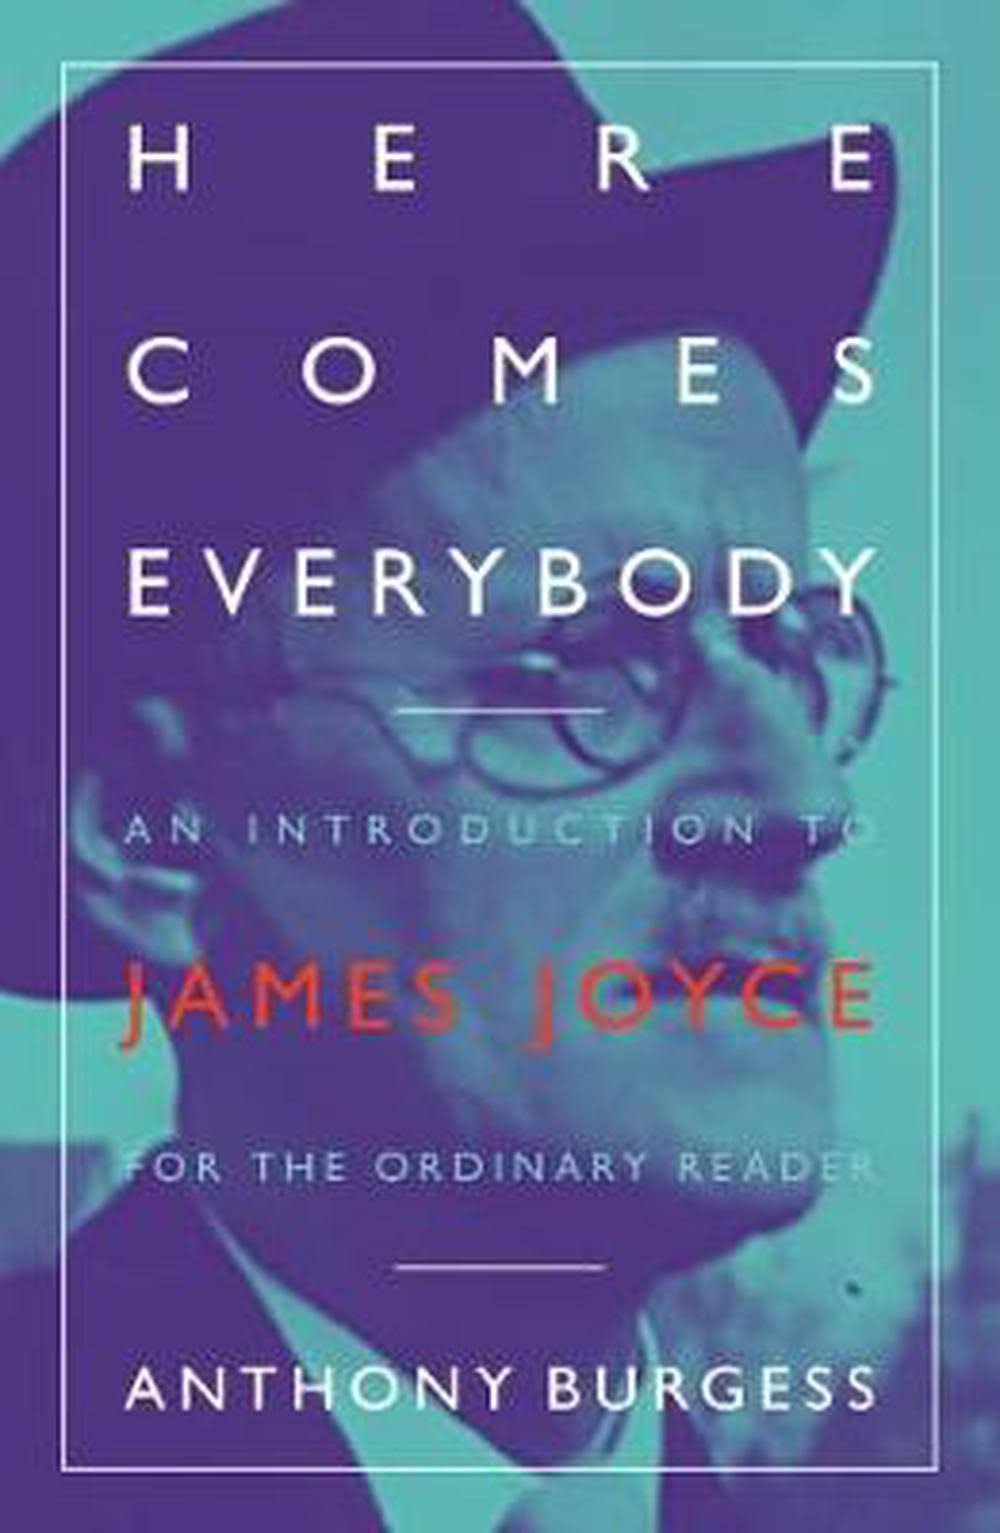 Here Comes Everybody: An Introduction to James Joyce for the Ordinary Reader [Book]